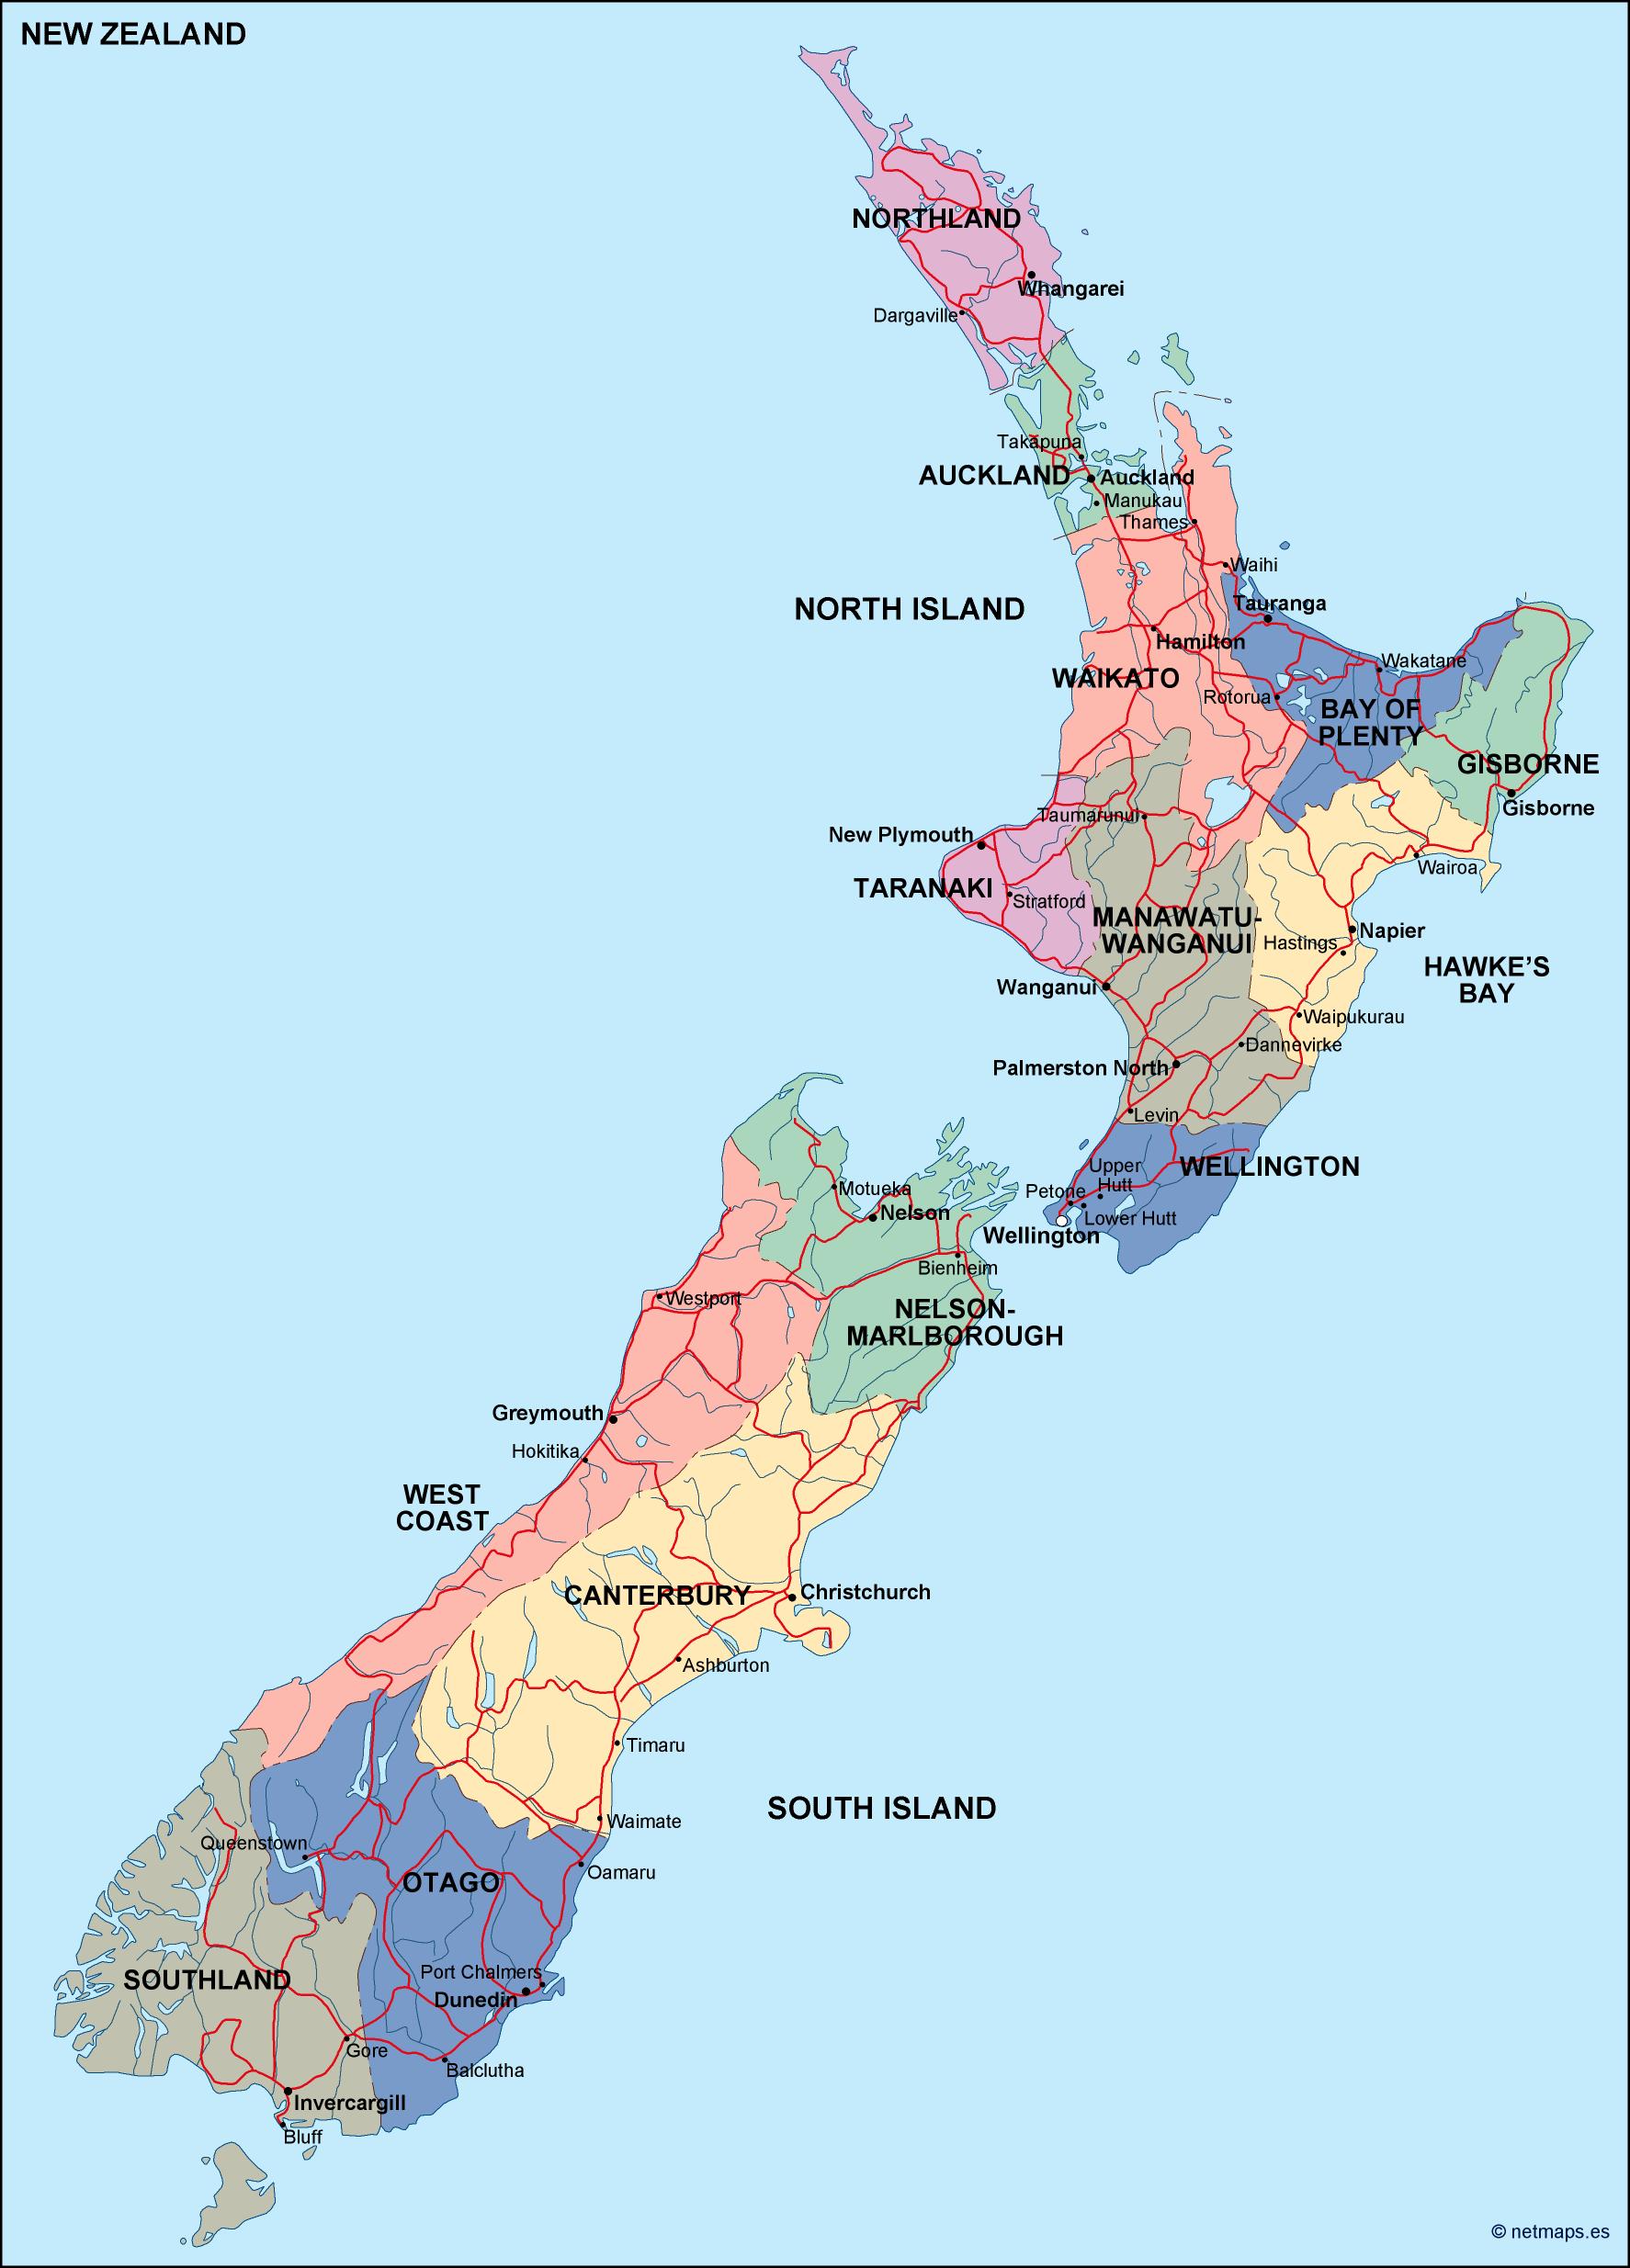 new zealand political map. Eps Illustrator Map for your project